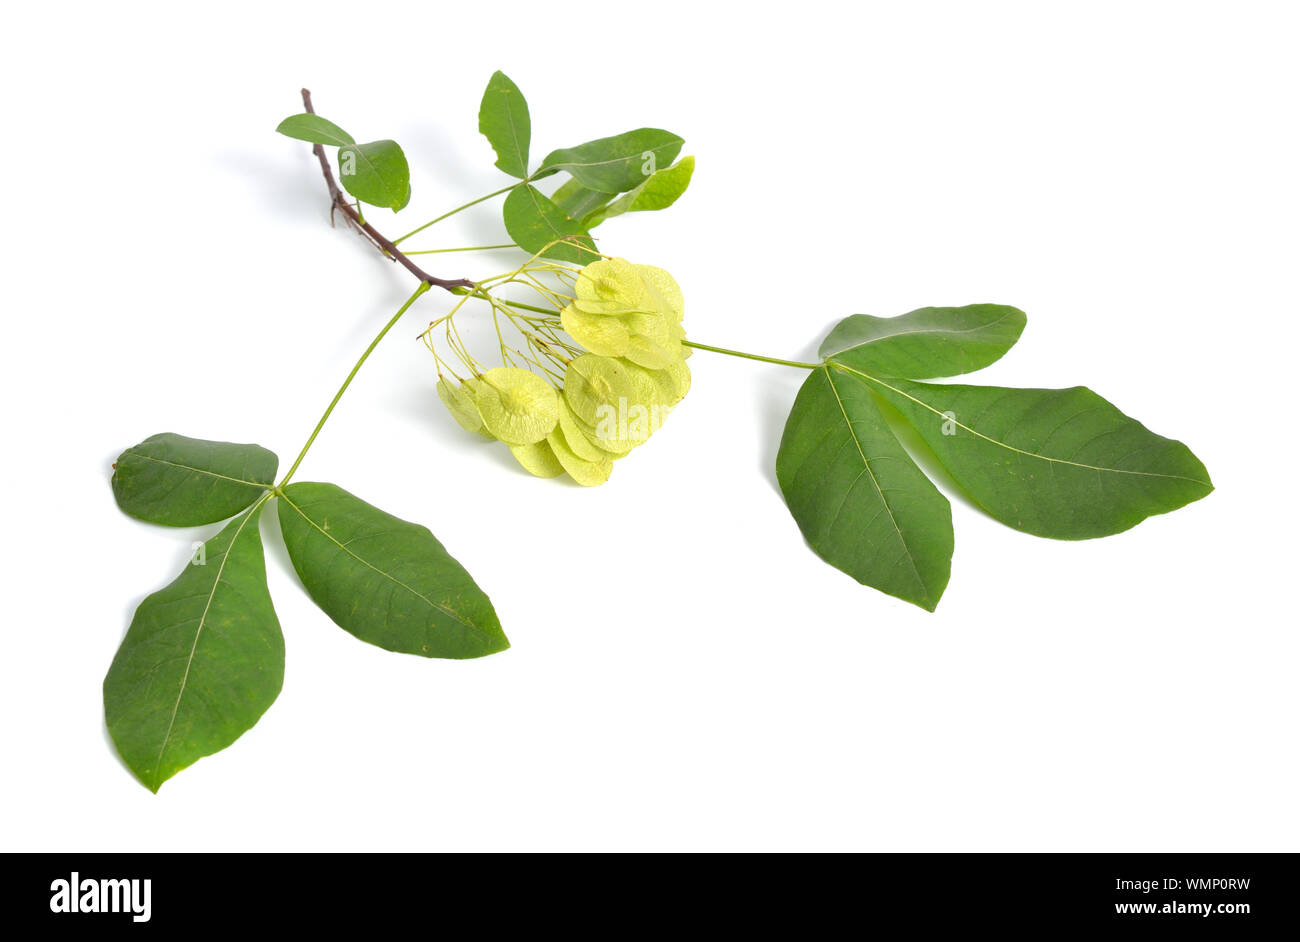 Ptelea trifoliata, commonly known as common hoptree, wafer ash, stinking ash, and skunk bush. Isolated on white. Stock Photo